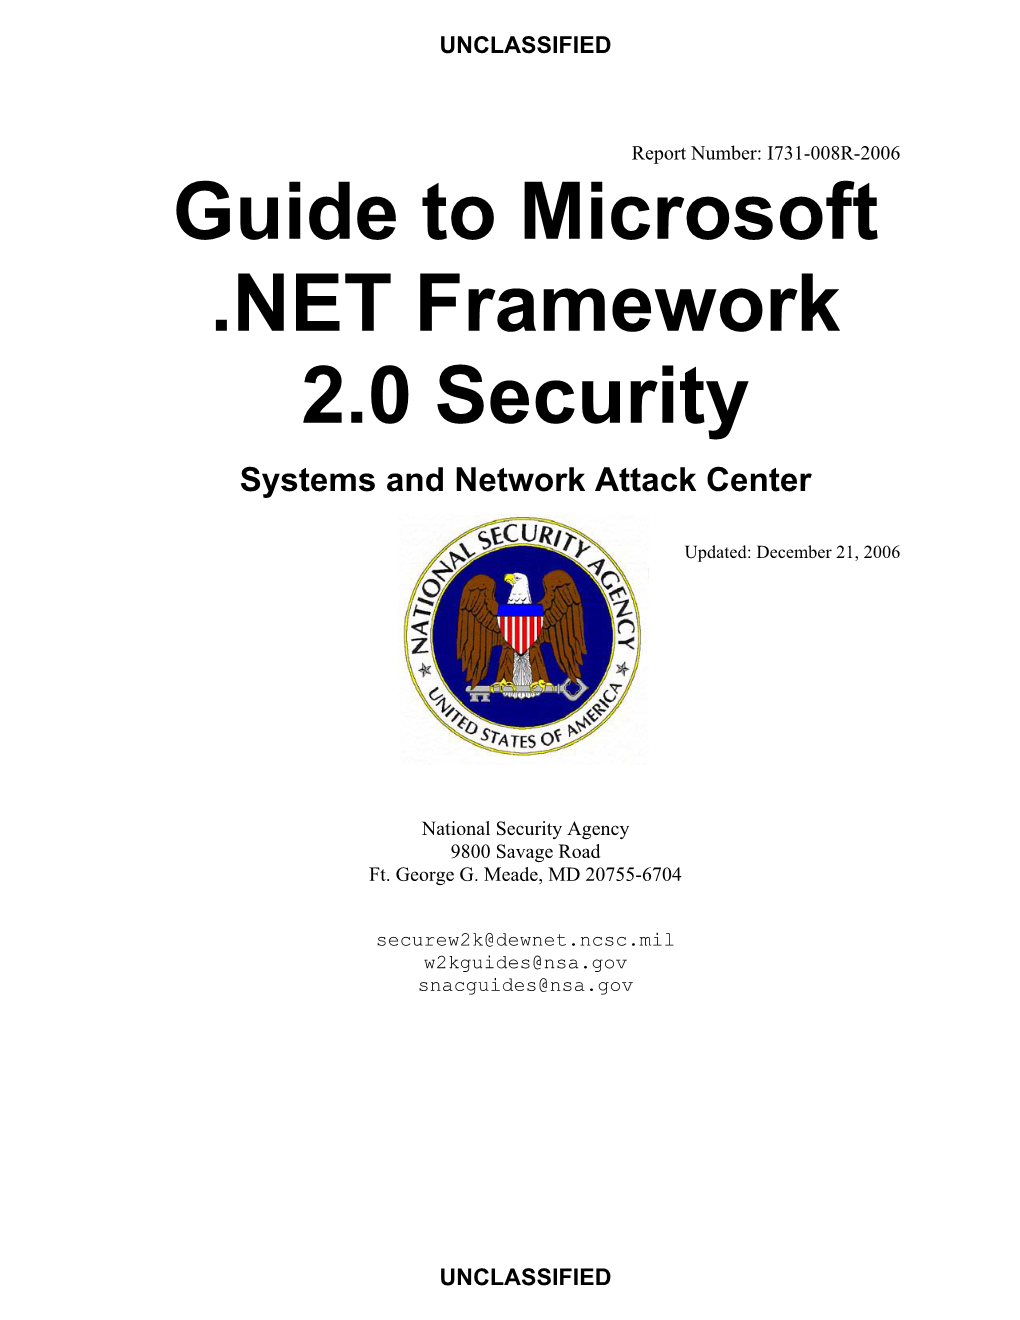 Guide to Microsoft .NET Framework 2.0 Security Systems and Network Attack Center